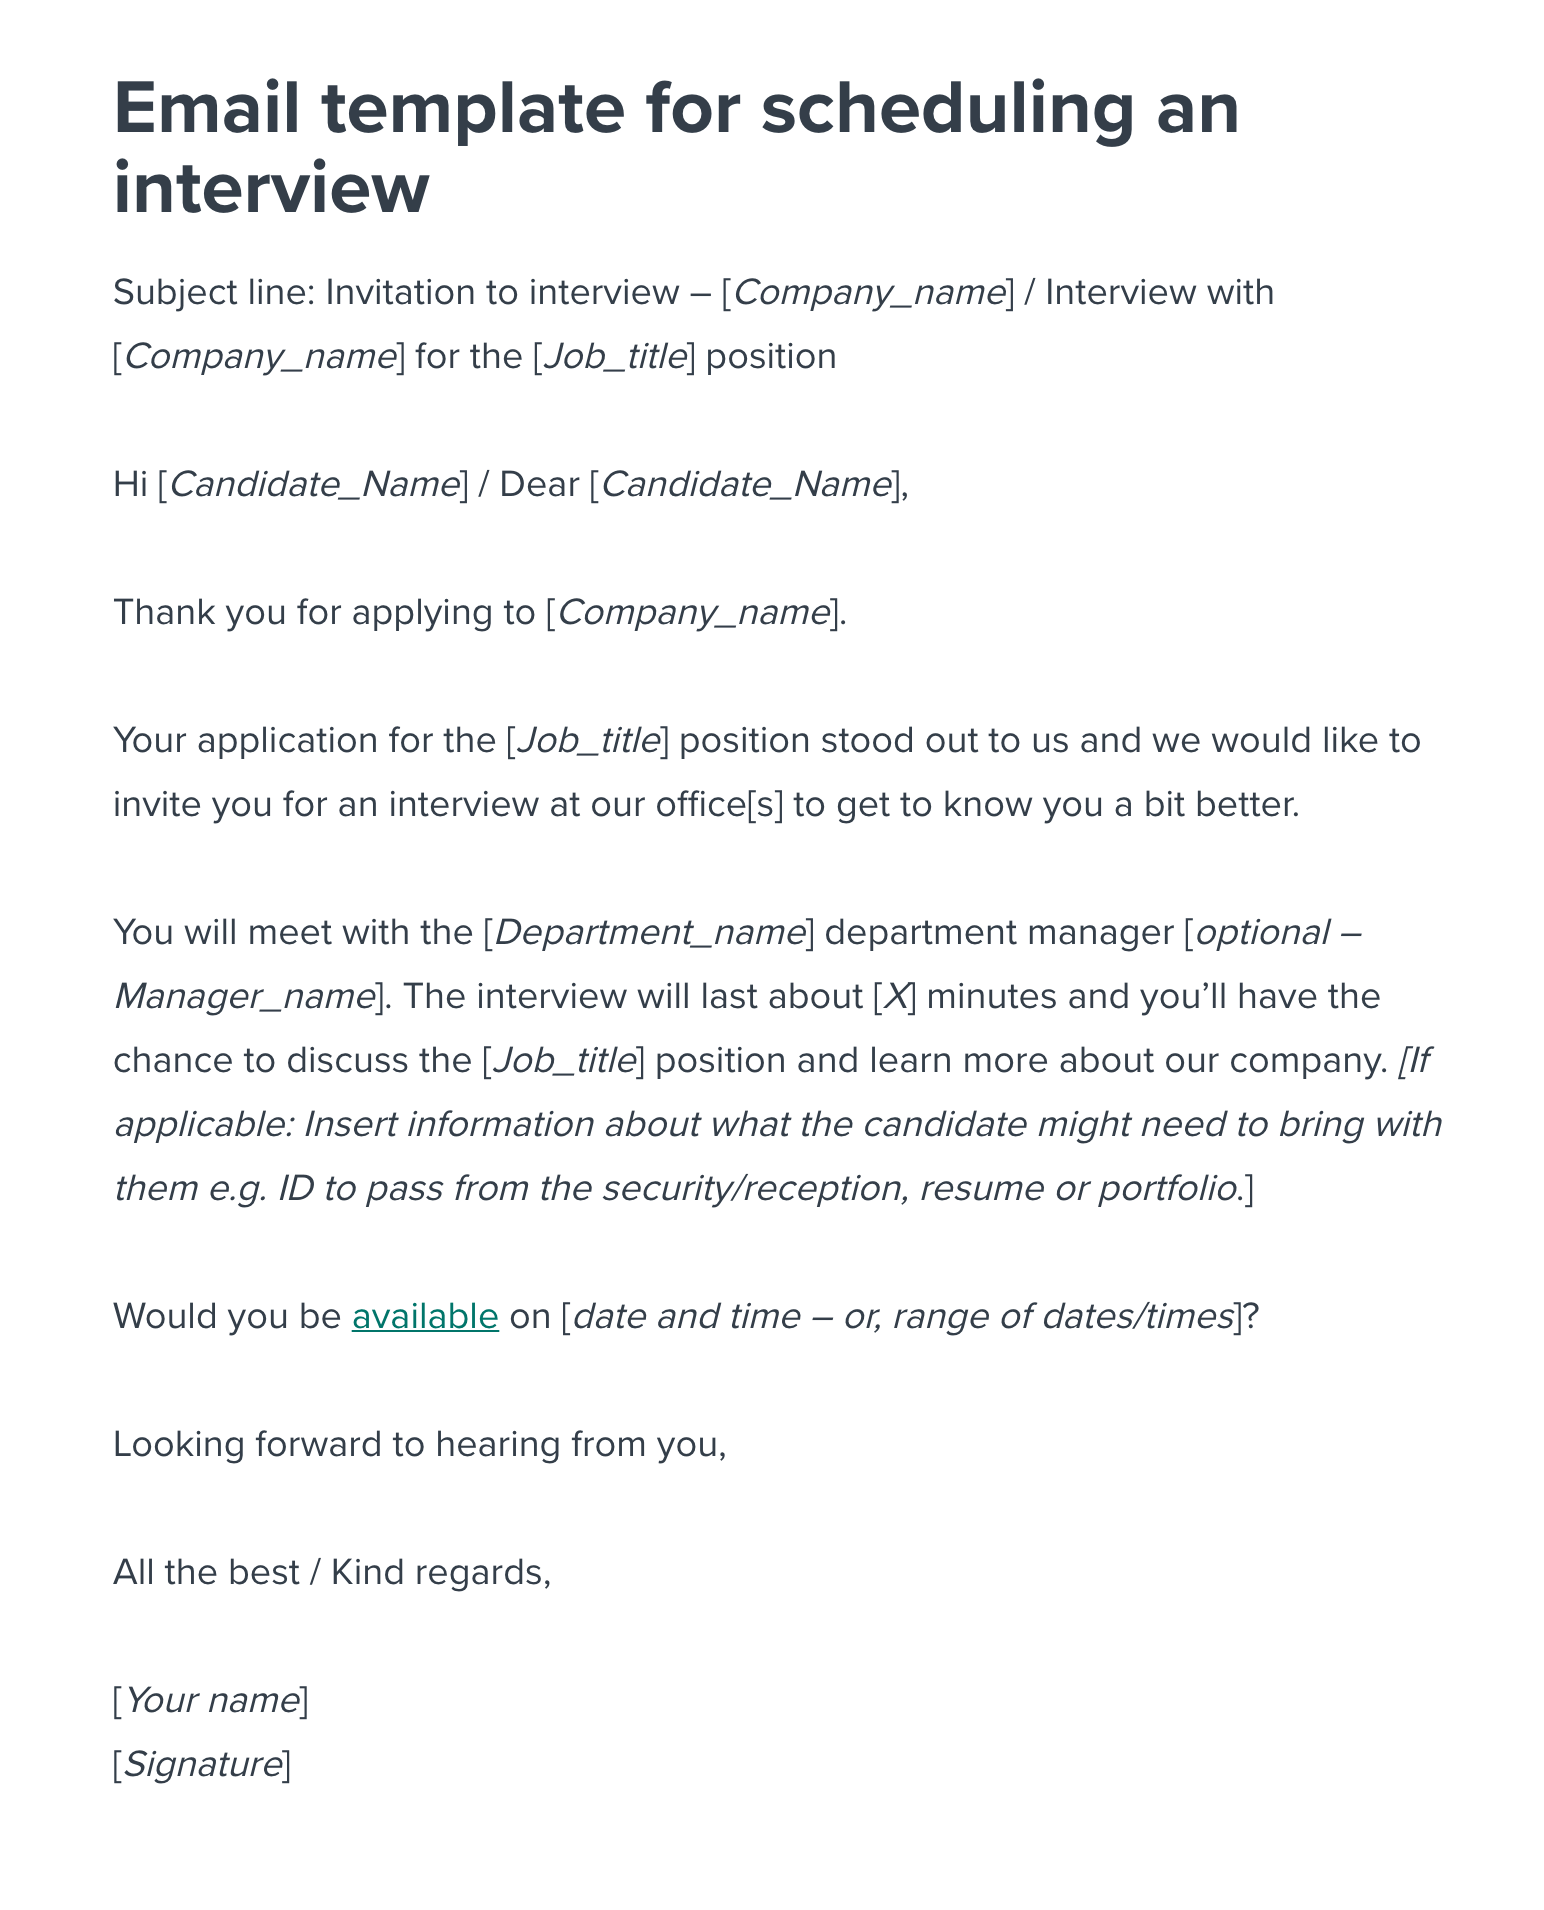 scheduling an interview email template | workable sample resume format for fresh graduates with no experience student word